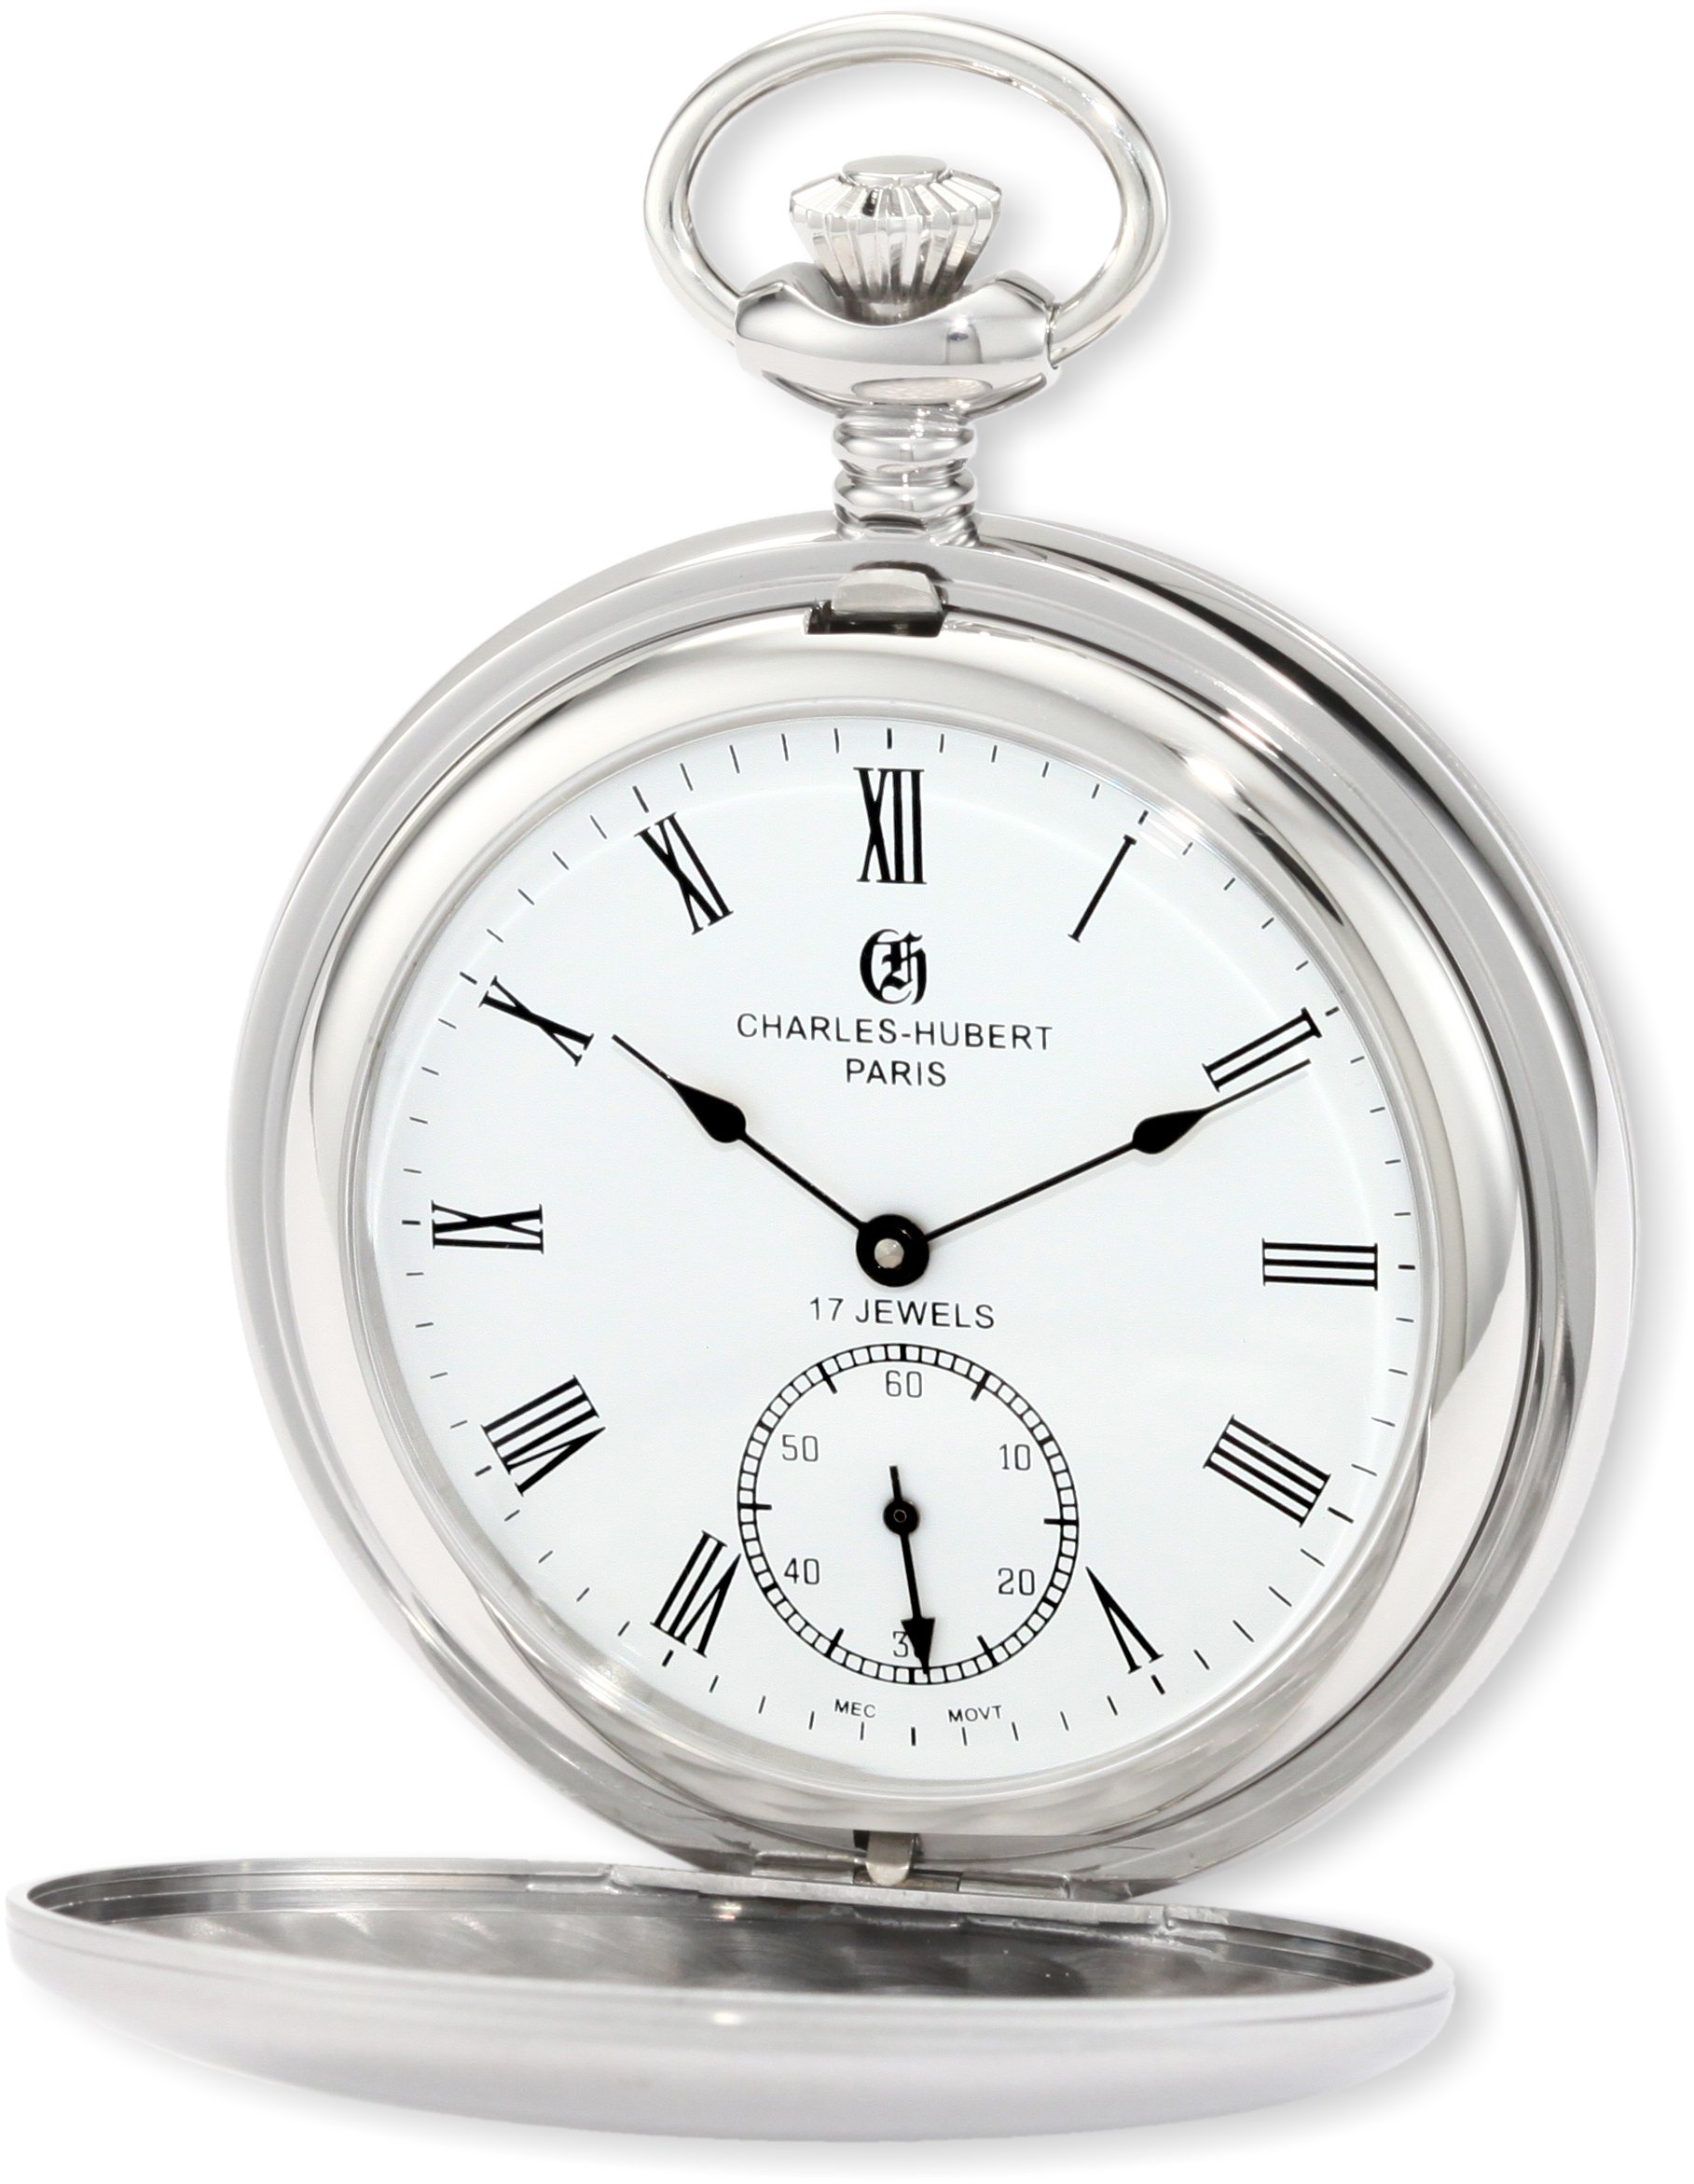 Charles-Hubert, Paris 3908-WR Premium Collection Stainless Steel Satin Finish Double Hunter Case Mechanical Pocket Watch